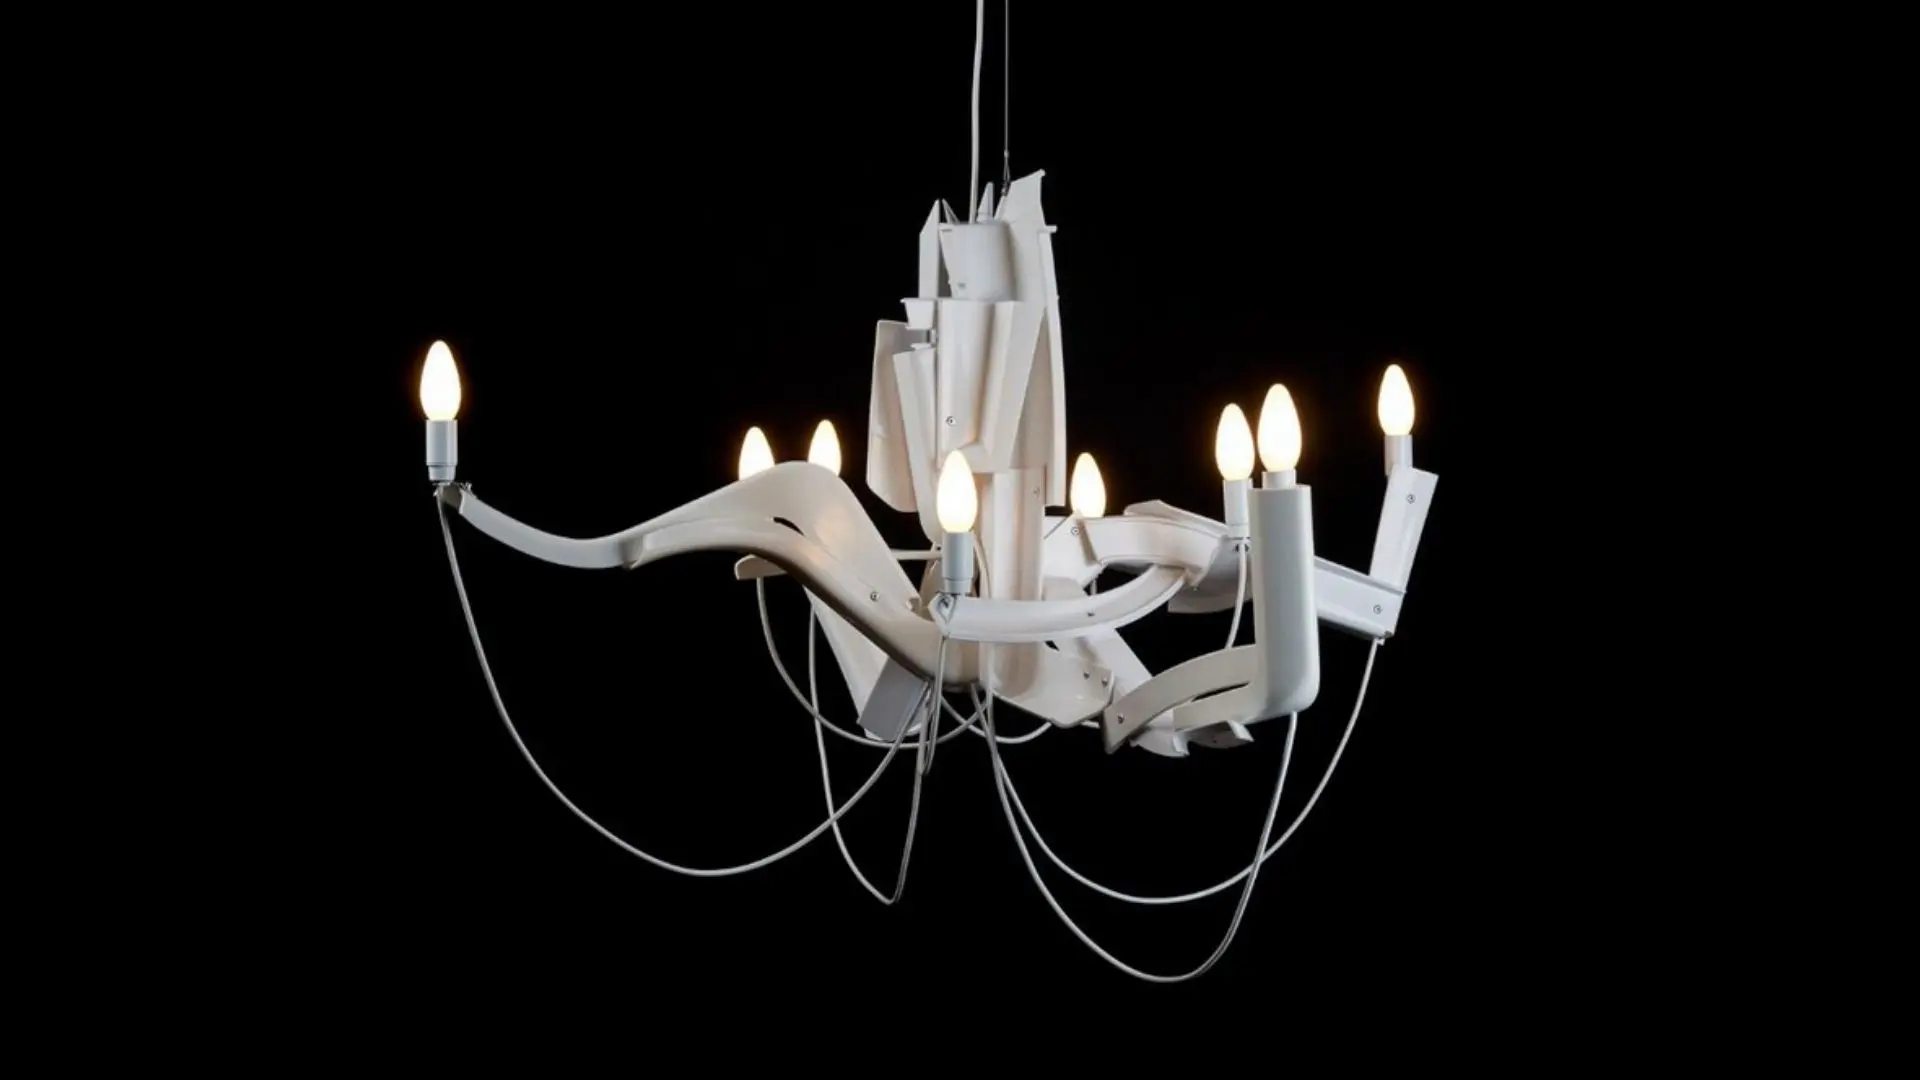 Chandelier, Monobloc Dinner Party _ 10 whimsical creations by Pierre Castignola - Cover